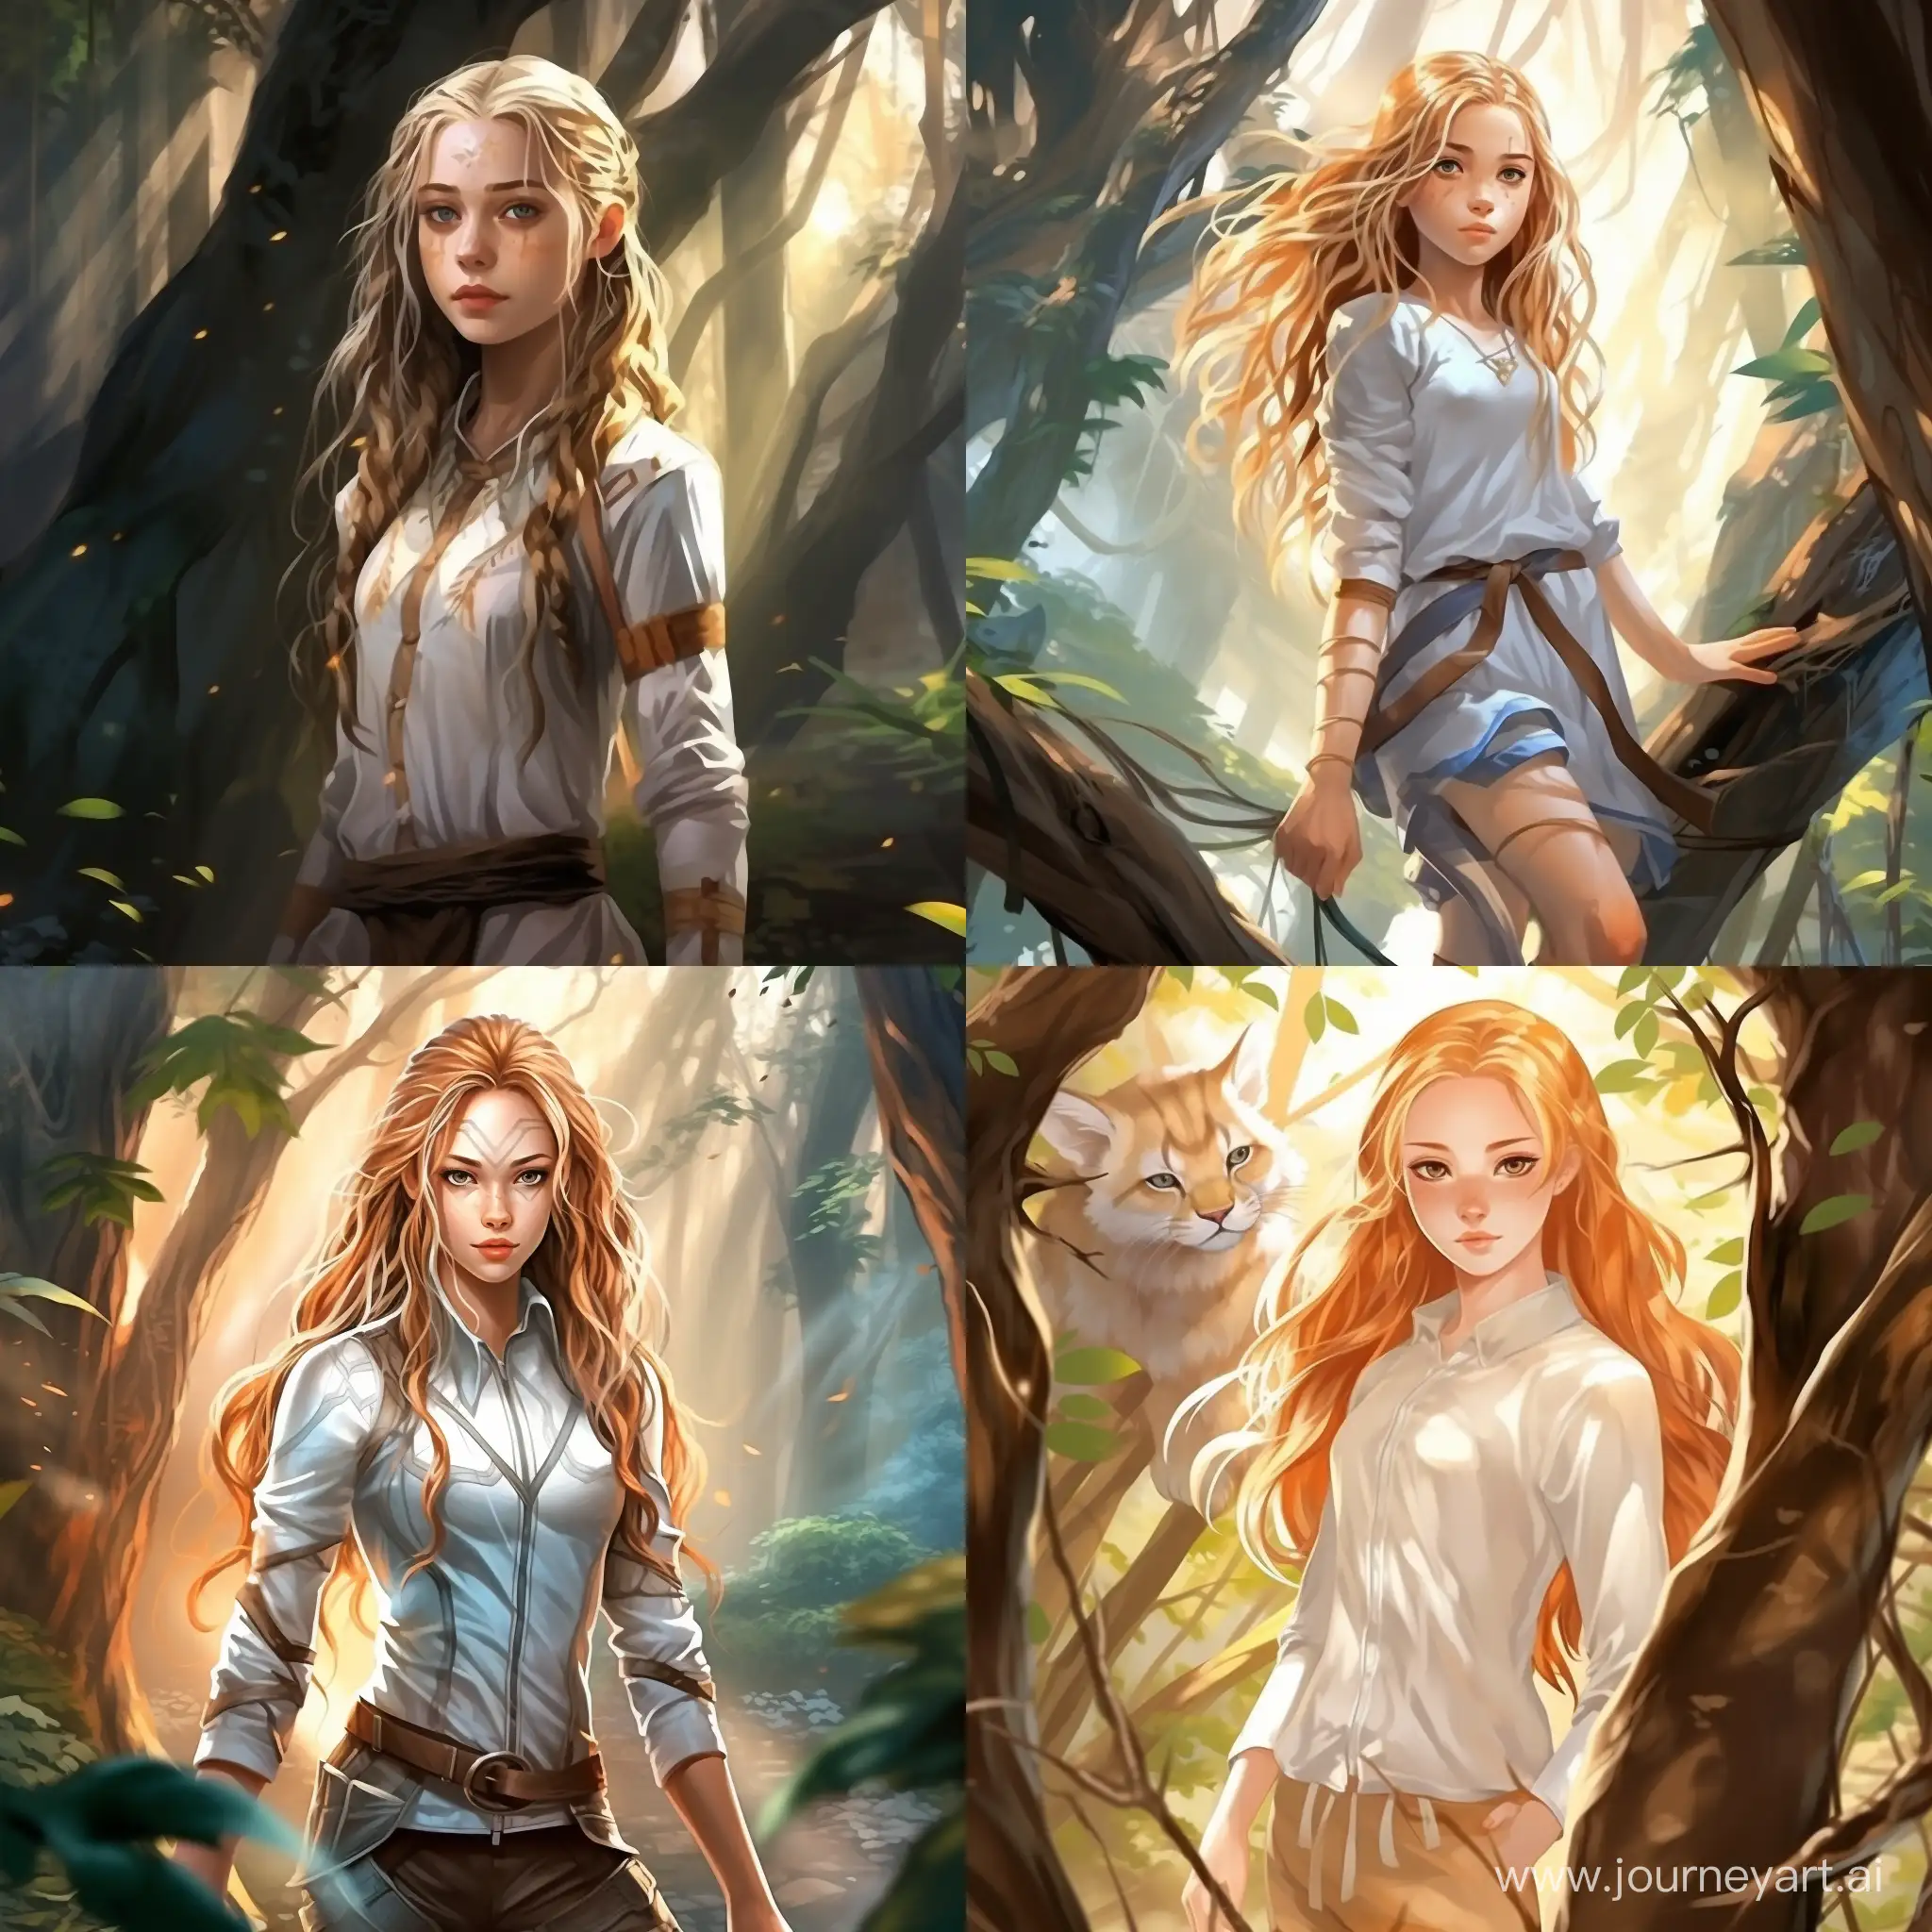 Beautiful girl, golden hair, gray-blue eyes, snow-white skin, teenager, 14 years old, avatar style legend of aang, journey in the forest, in full growth, high quality, high detail, cartoon art